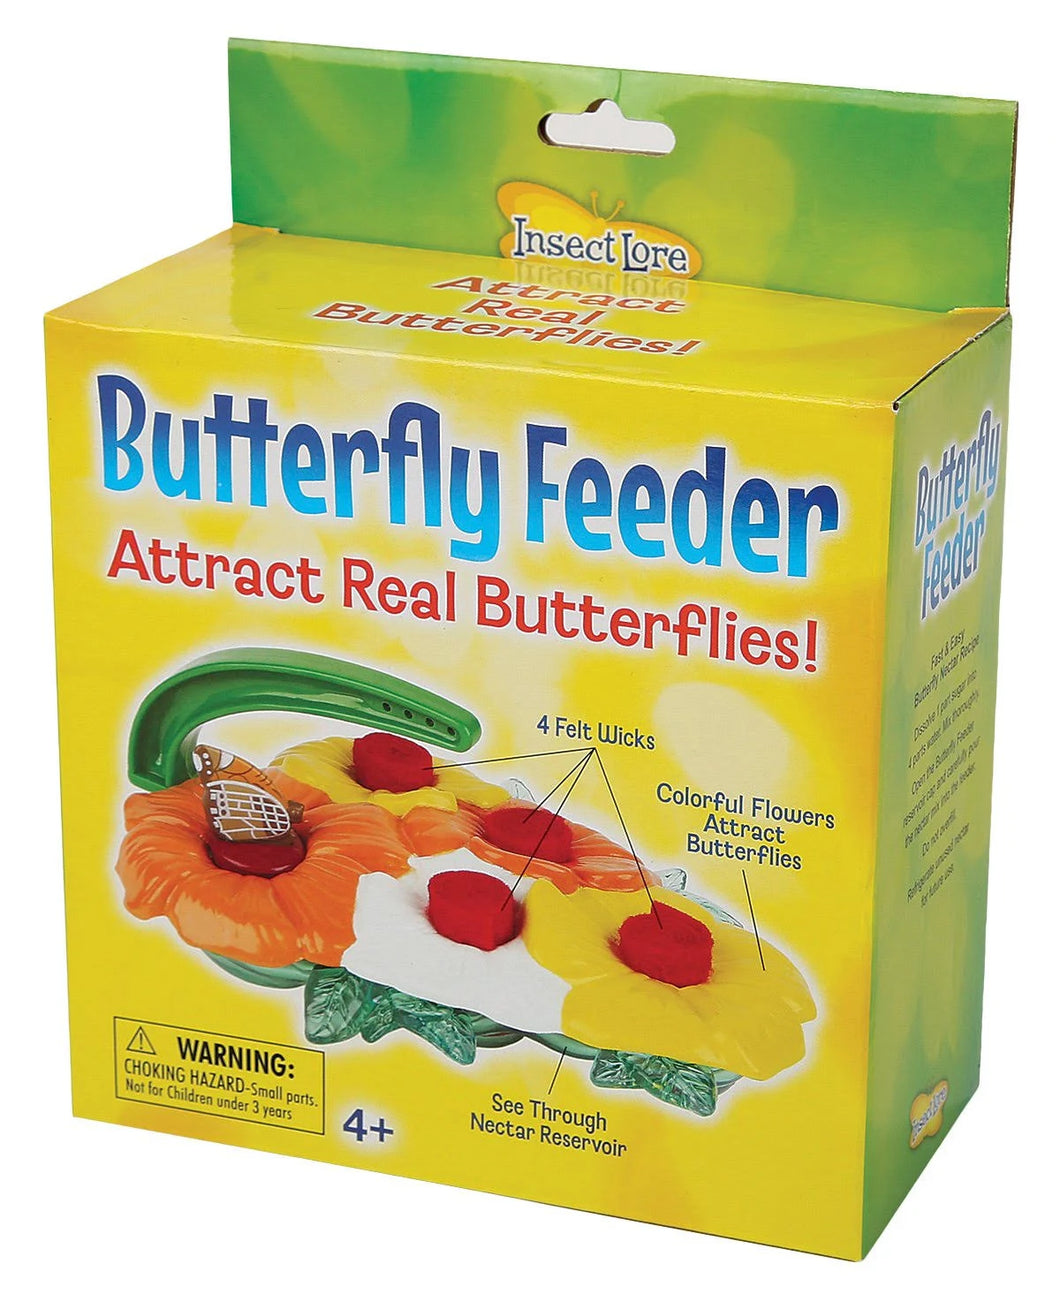 Insect Lore Butterfly Feeder 15cm L x 11.5cm W see through nectar reservoir, yellow, orange, and white flowers, butterfly-shaped feeder cork, hanging arm and 4 felt drinking wicks on yellow and green box on white background.